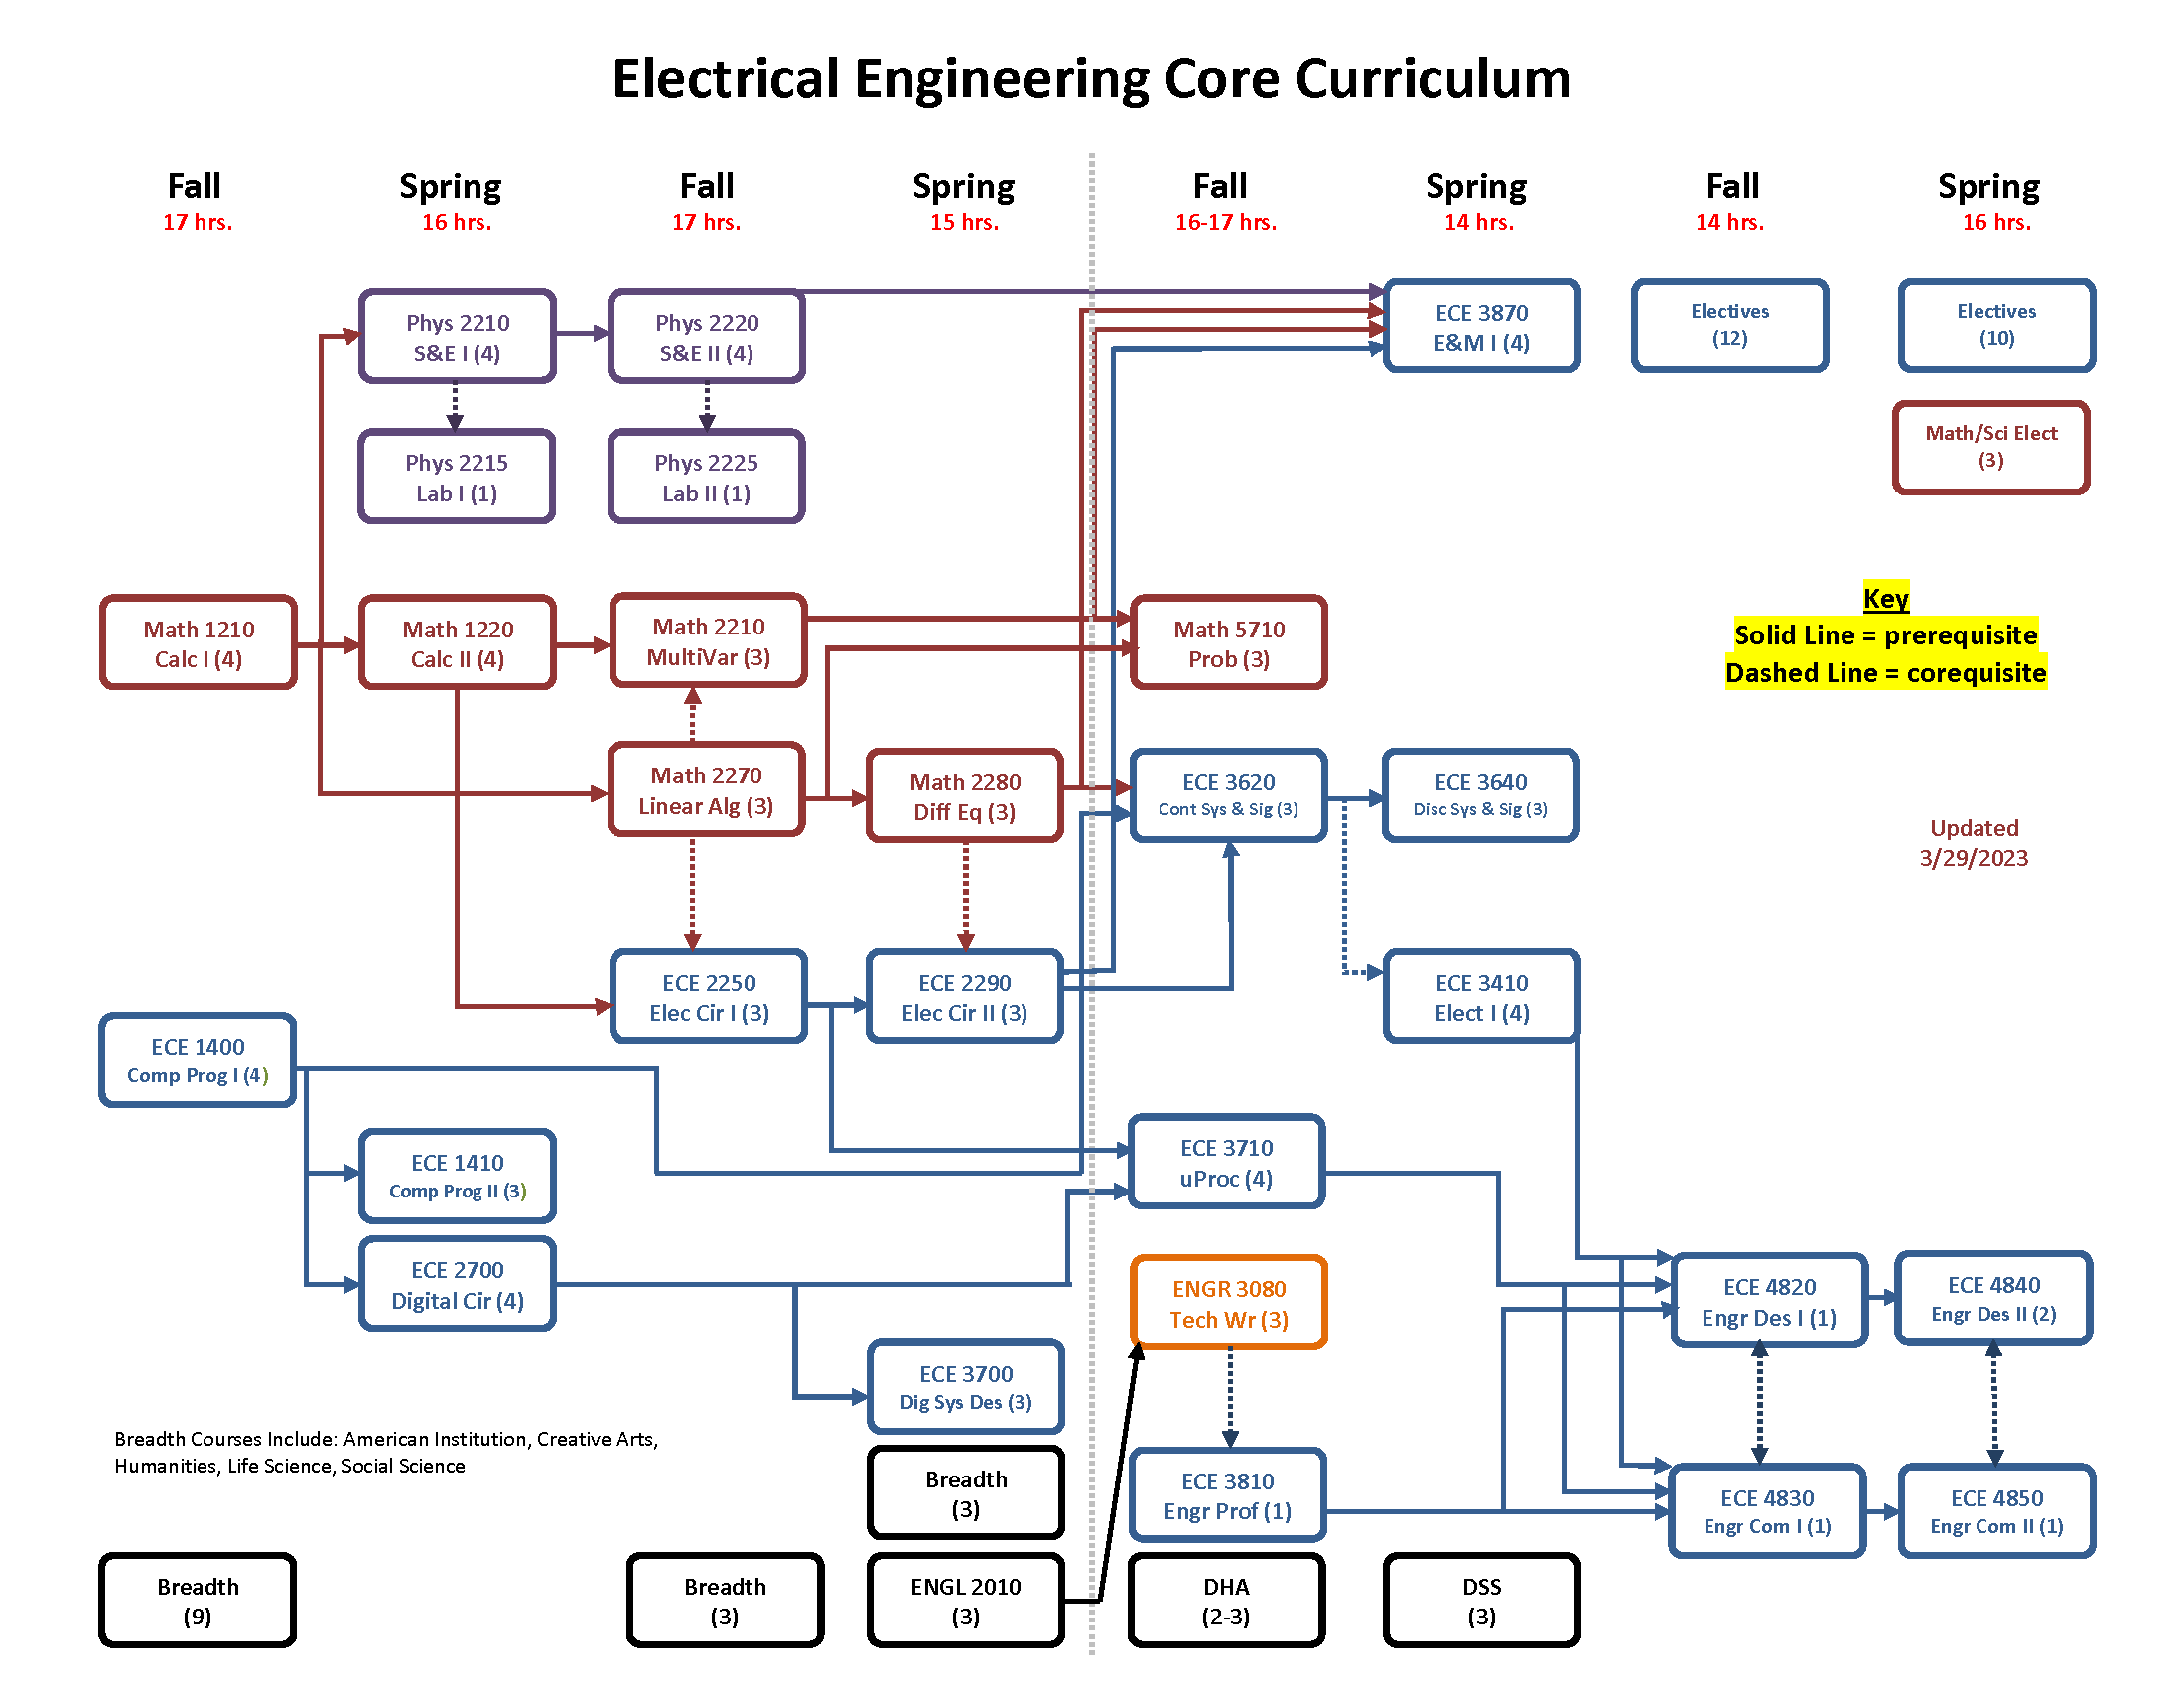 Visual representation of what courses one should take each year in the Electrical Engineering Program